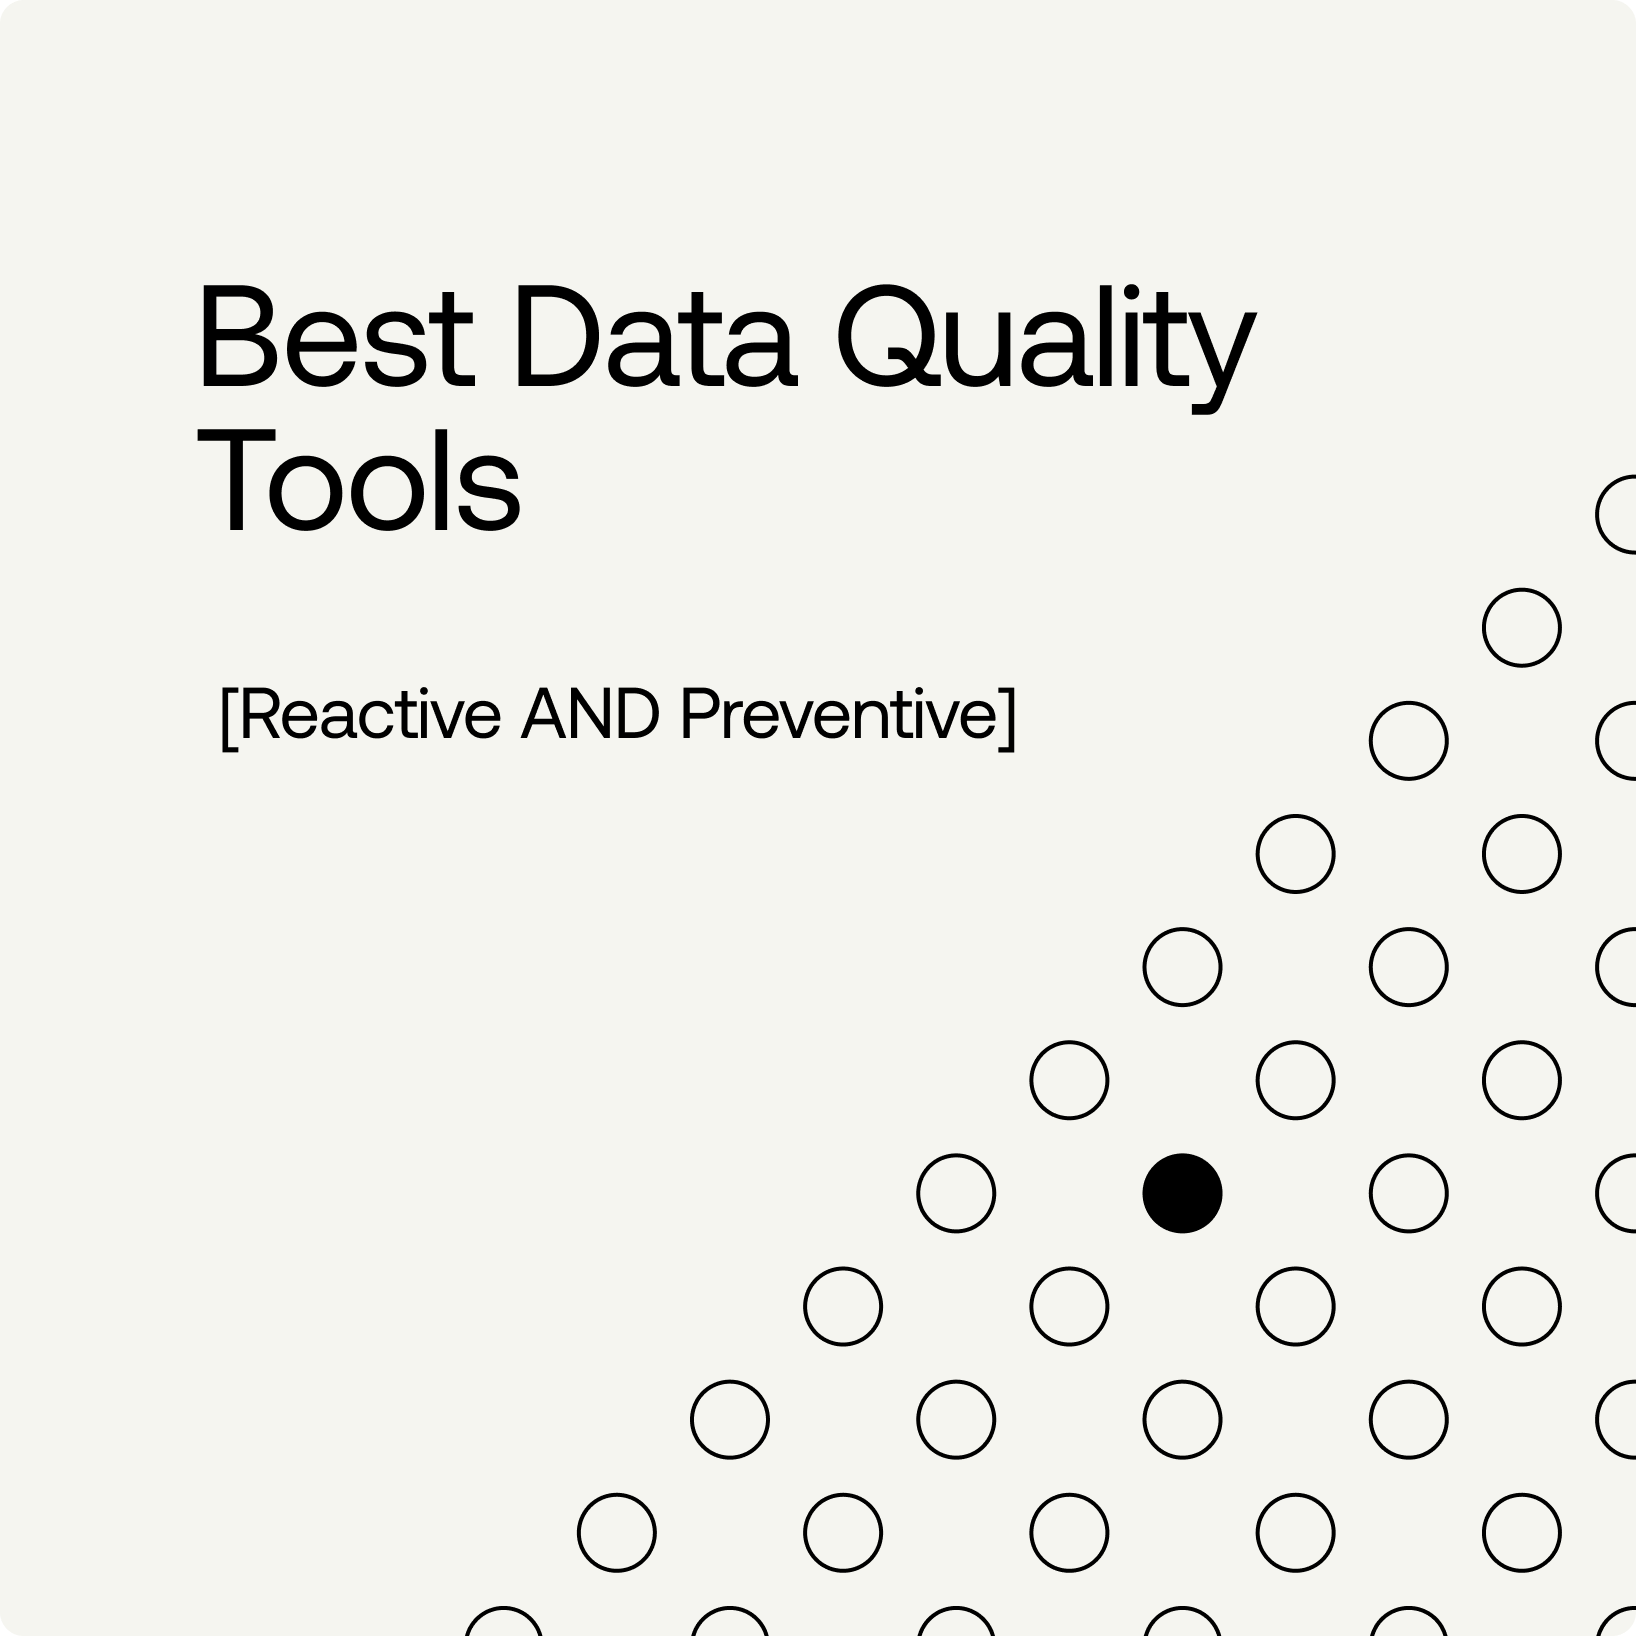 Best Data Quality Tools [Reactive AND Preventative]